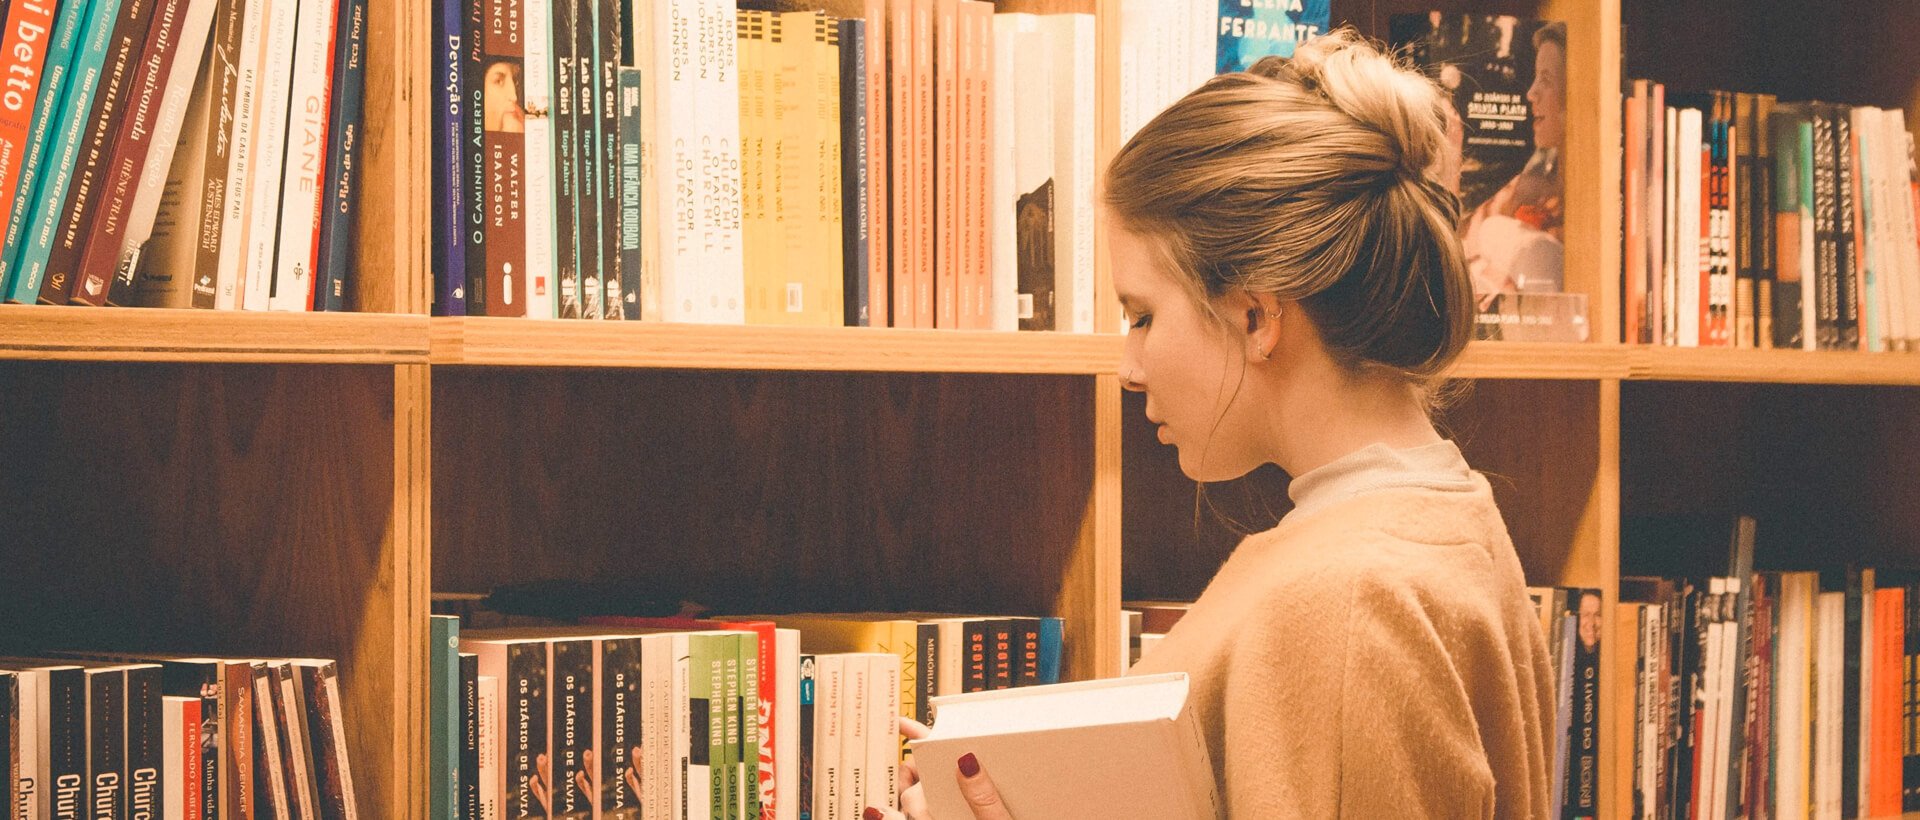 a woman reading a book in front of a bookshelf.